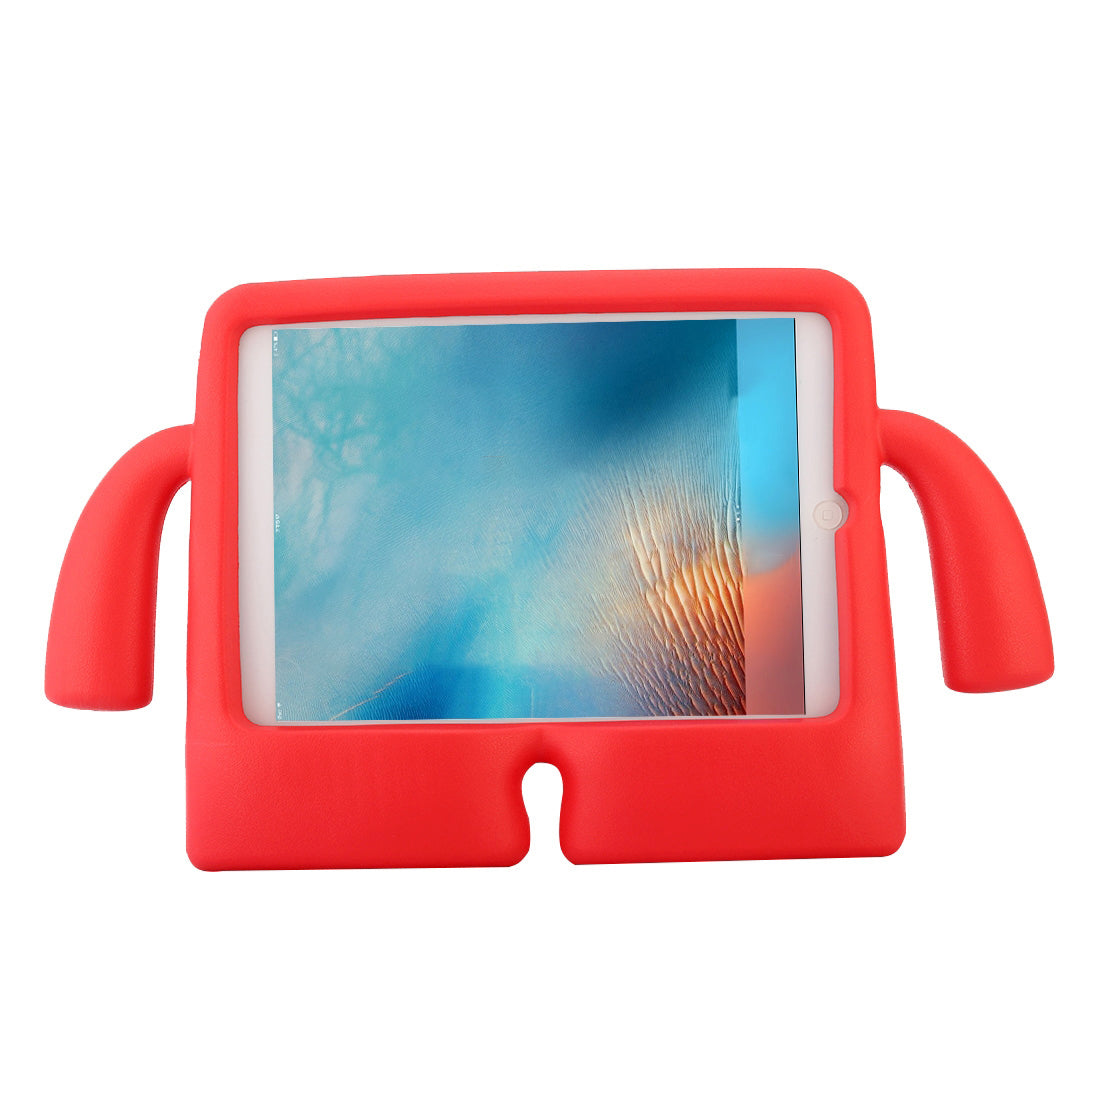 For Apple iPad Air 3 10.5" 2019 Kids Case Shockproof Cover With Carry Handle - Red